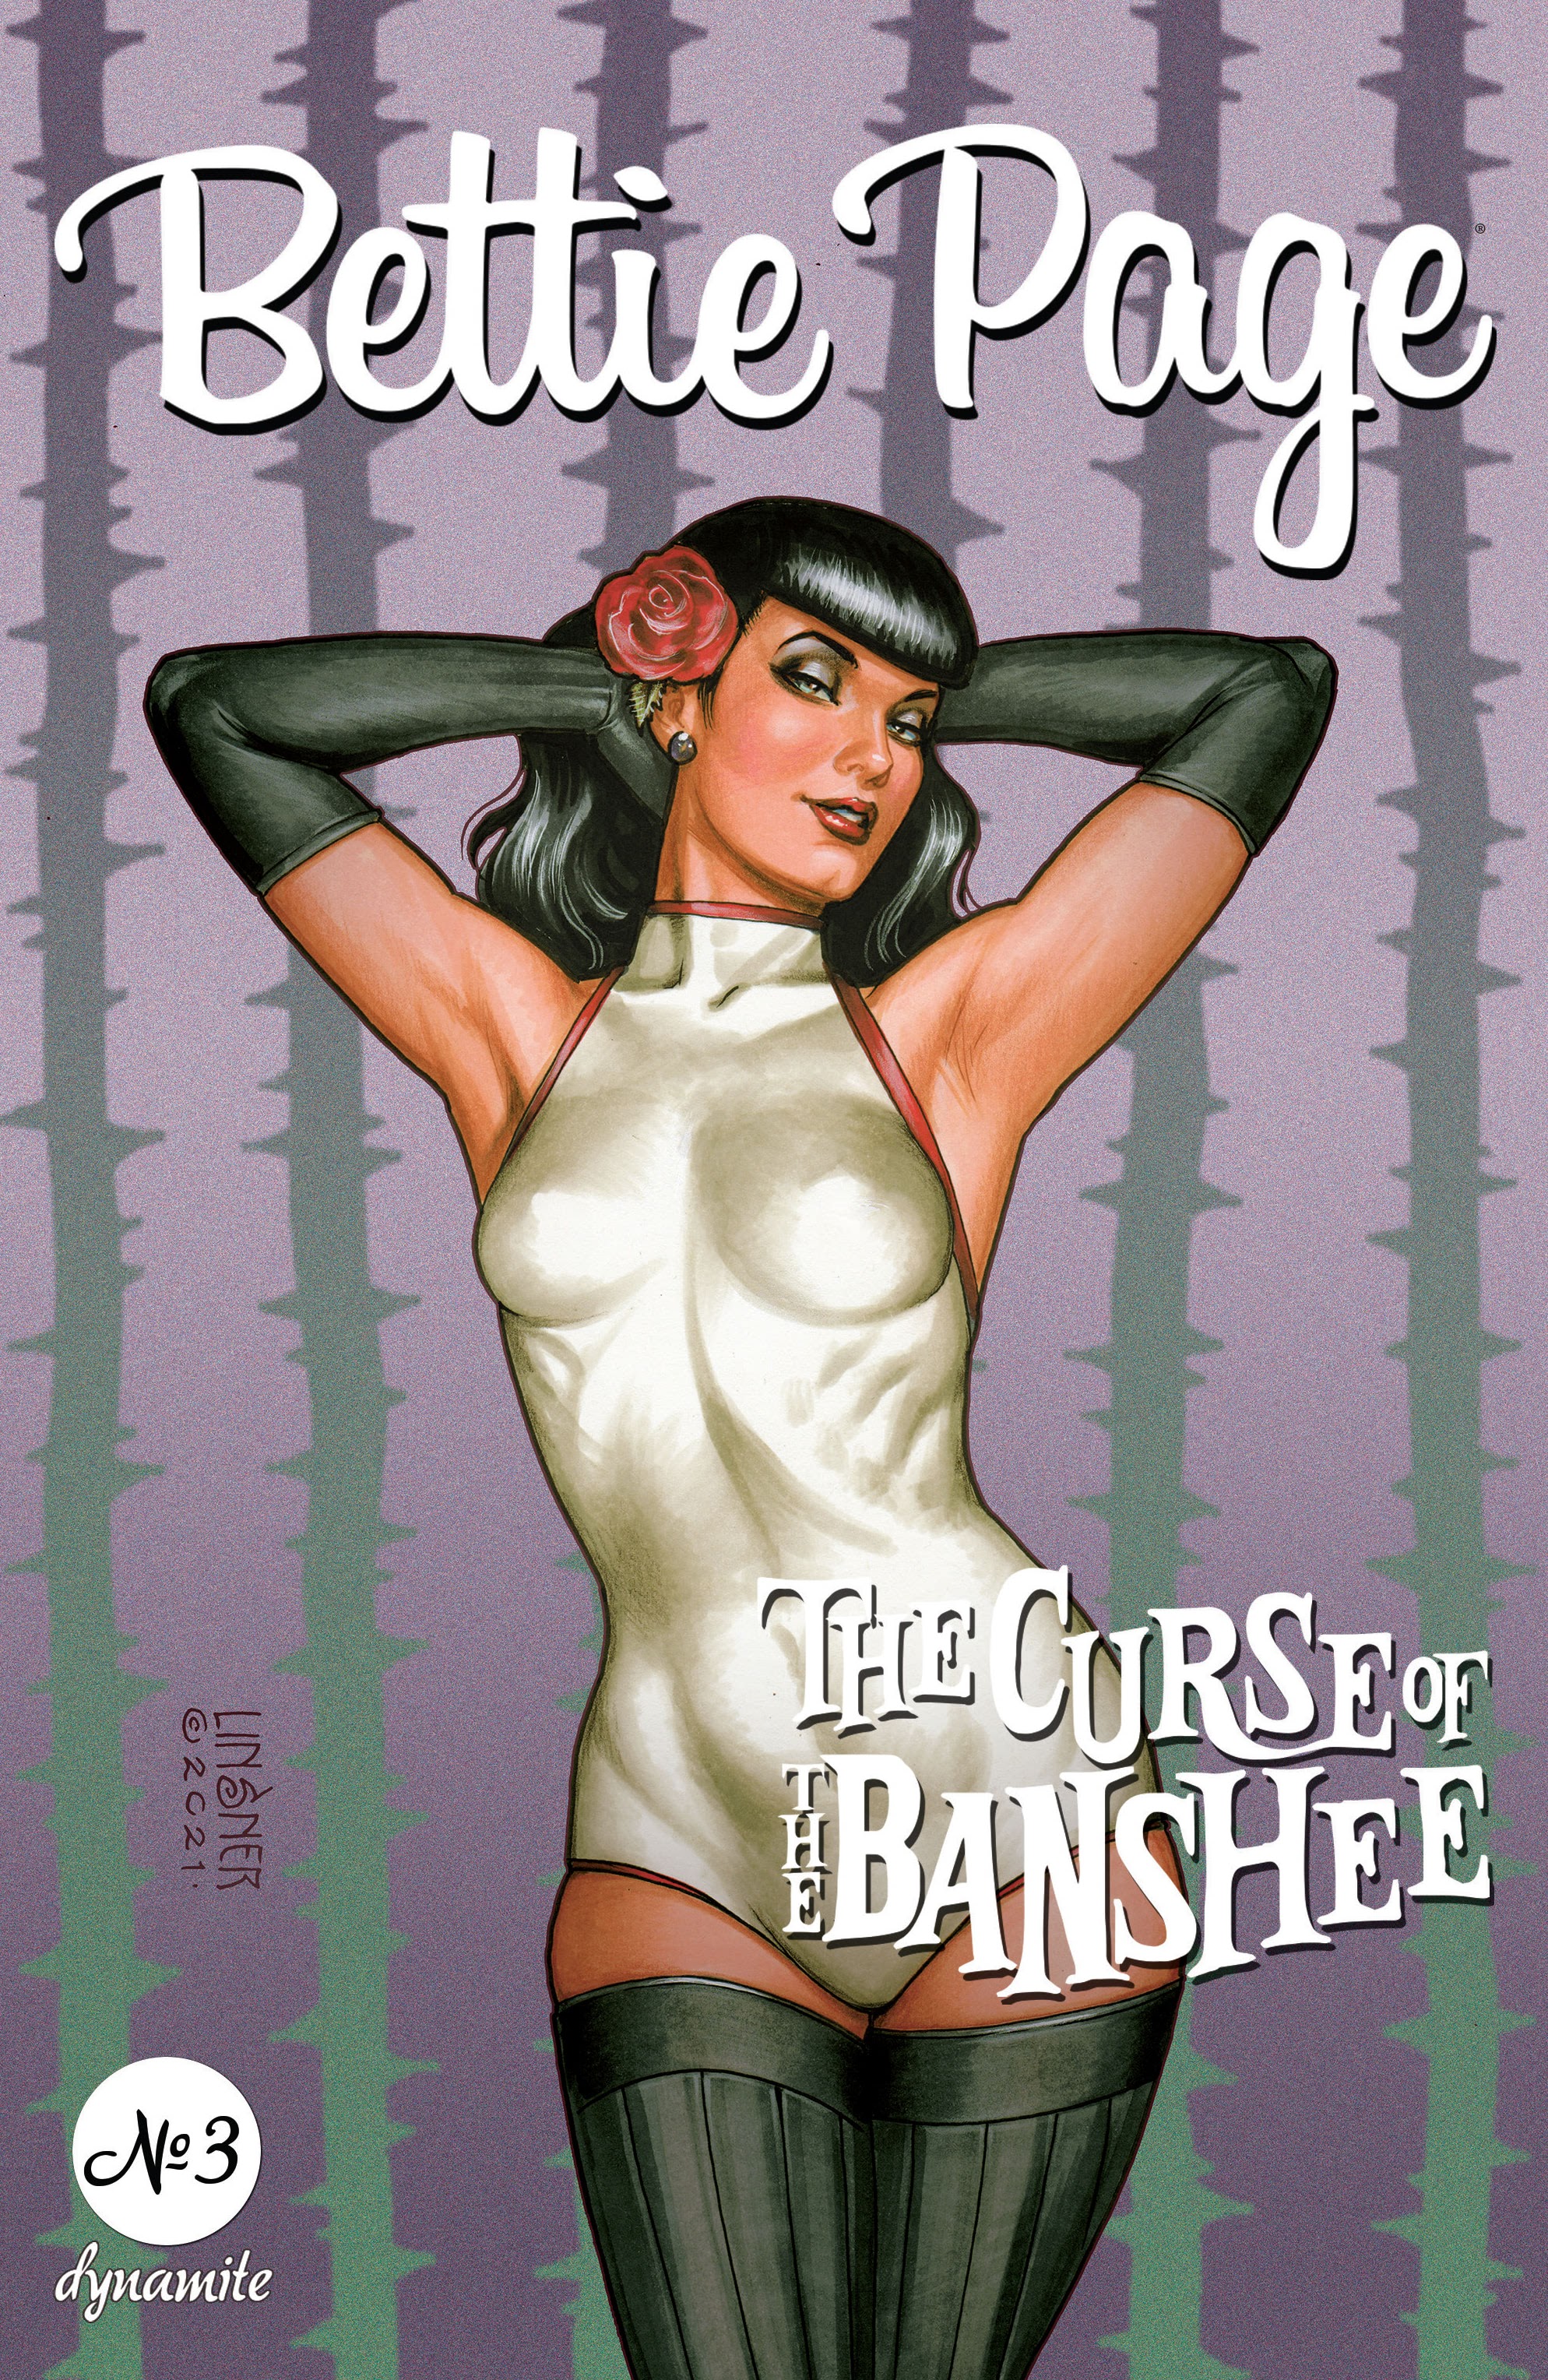 Read online Bettie Page & The Curse of the Banshee comic -  Issue #3 - 2